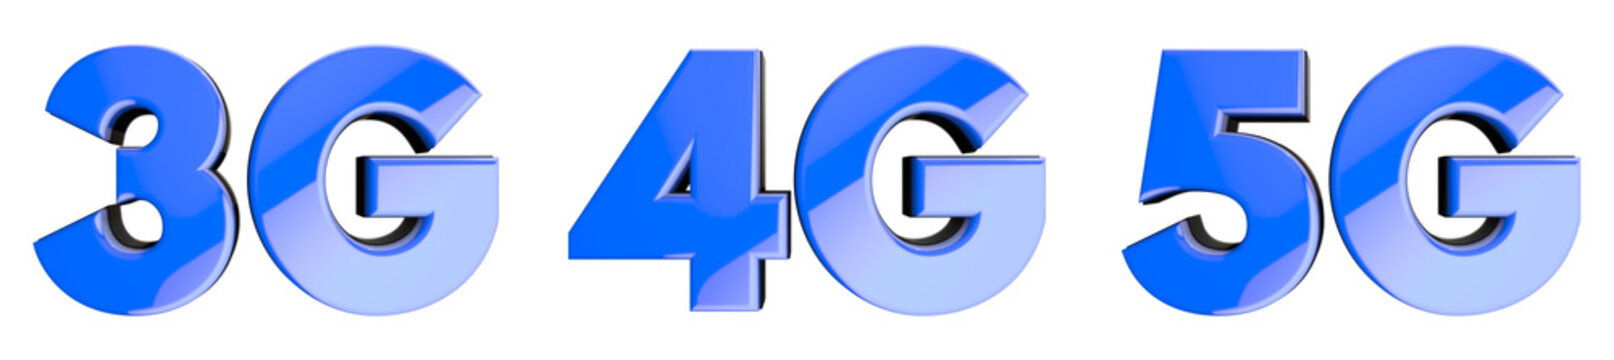 Blue glossy icon set witg mobile network speed symbols: 3G, 4G, 5G. 3D render with deph of field